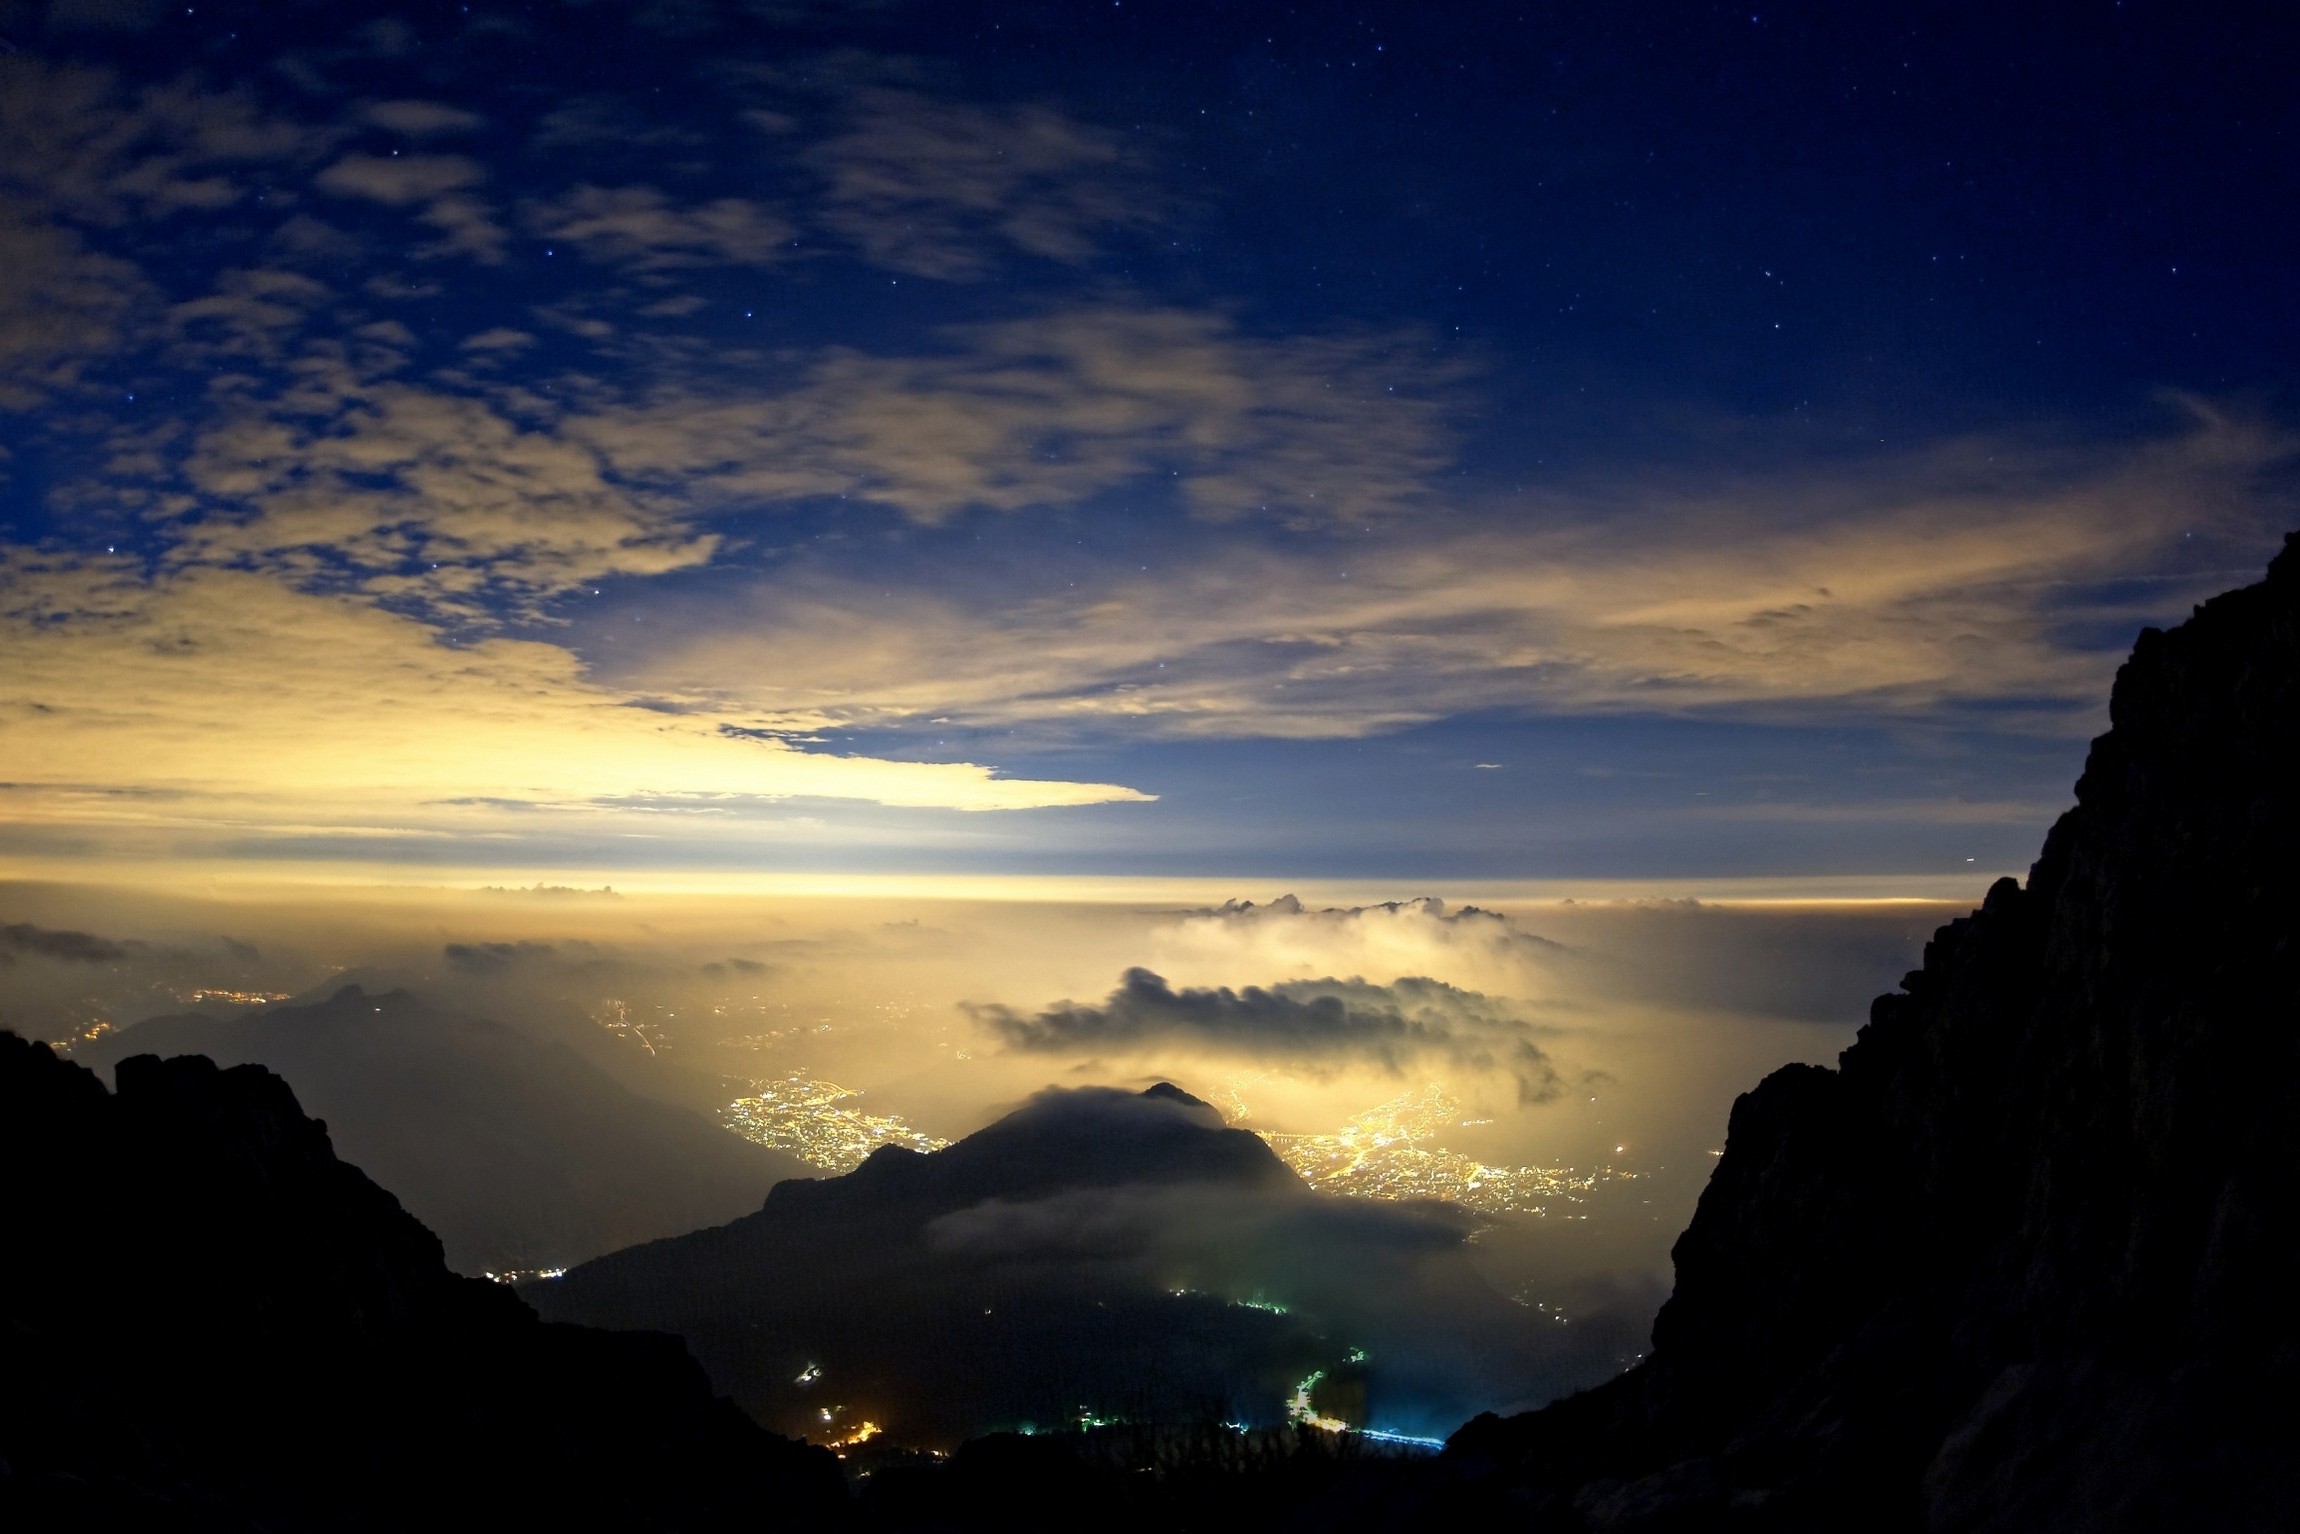 landscape, Nature, Mist, Valley, Evening, Stars, Sky, Clouds, City, Lights, Mountain, Italy Wallpaper